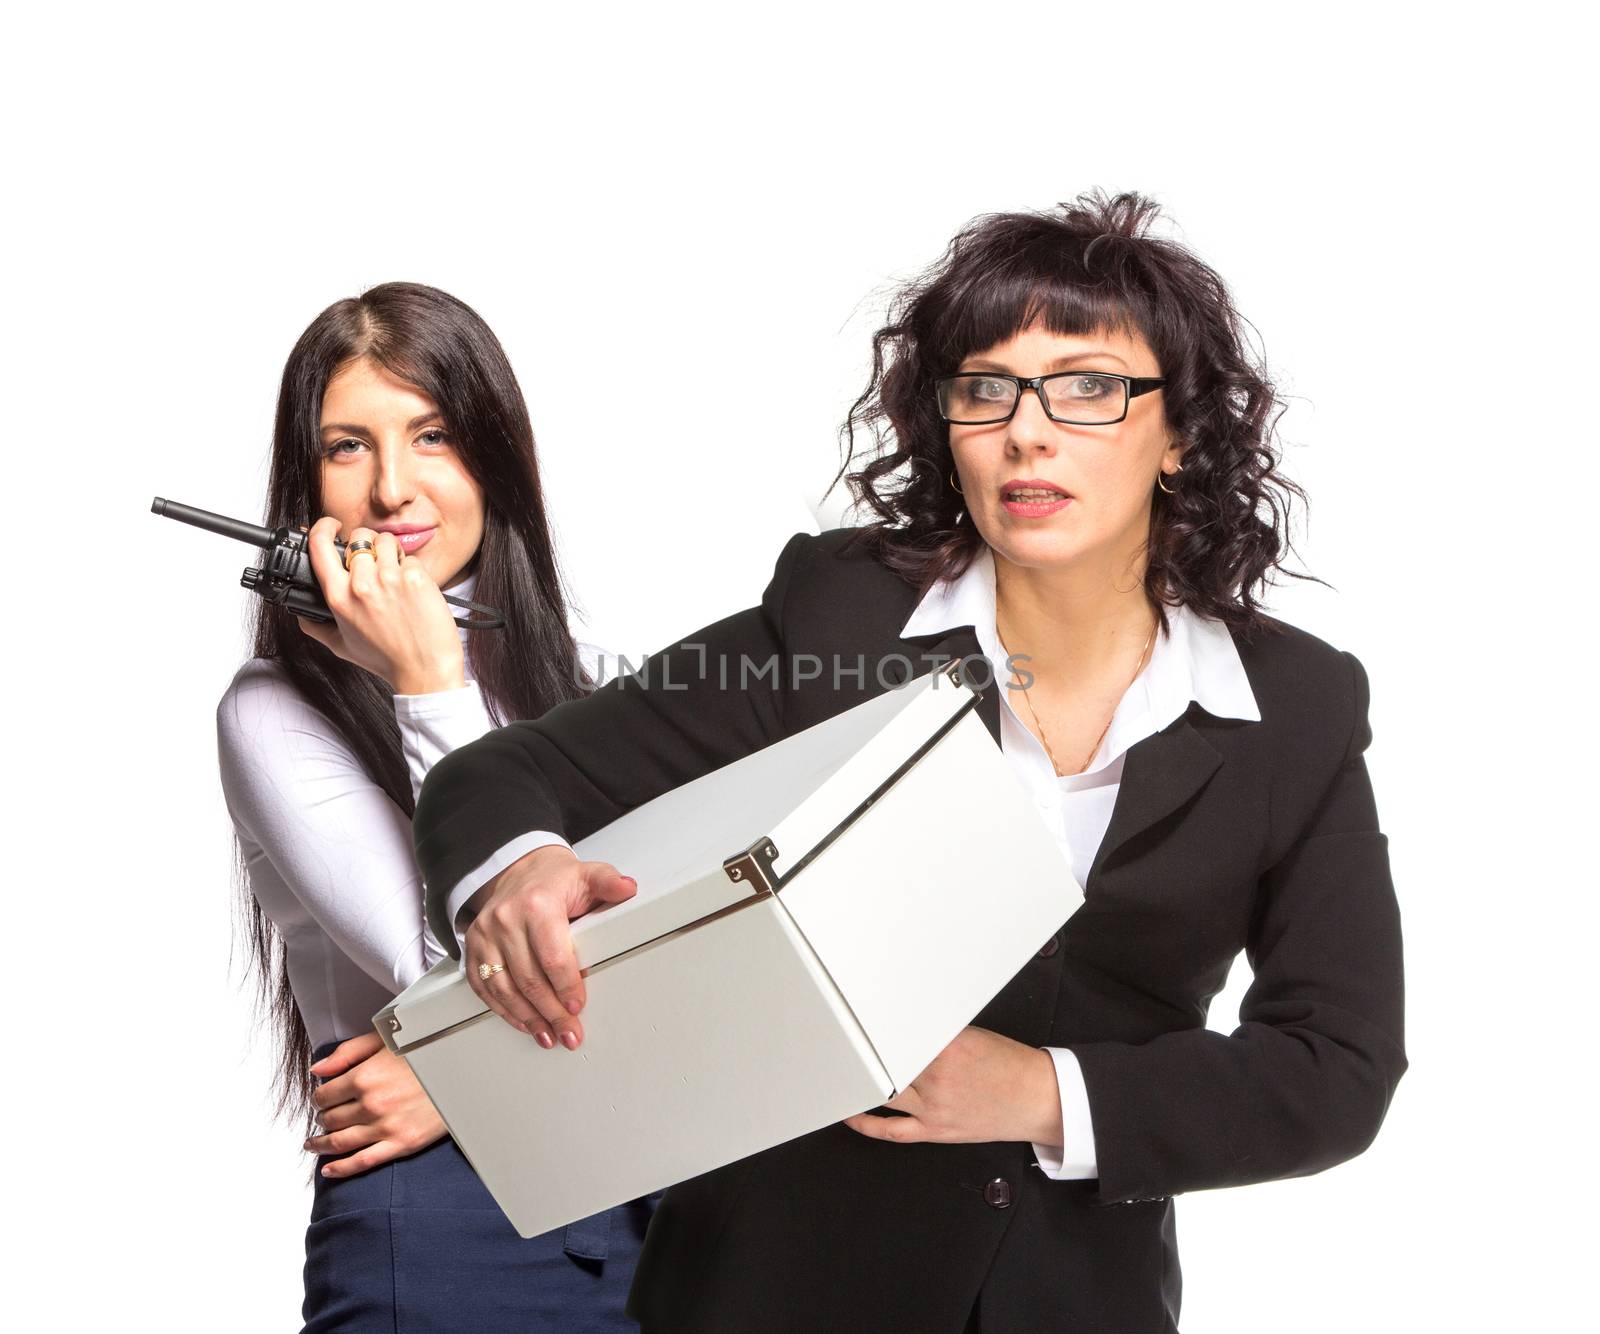 Business woman with cb radio and box looking at camera., isolated on white.